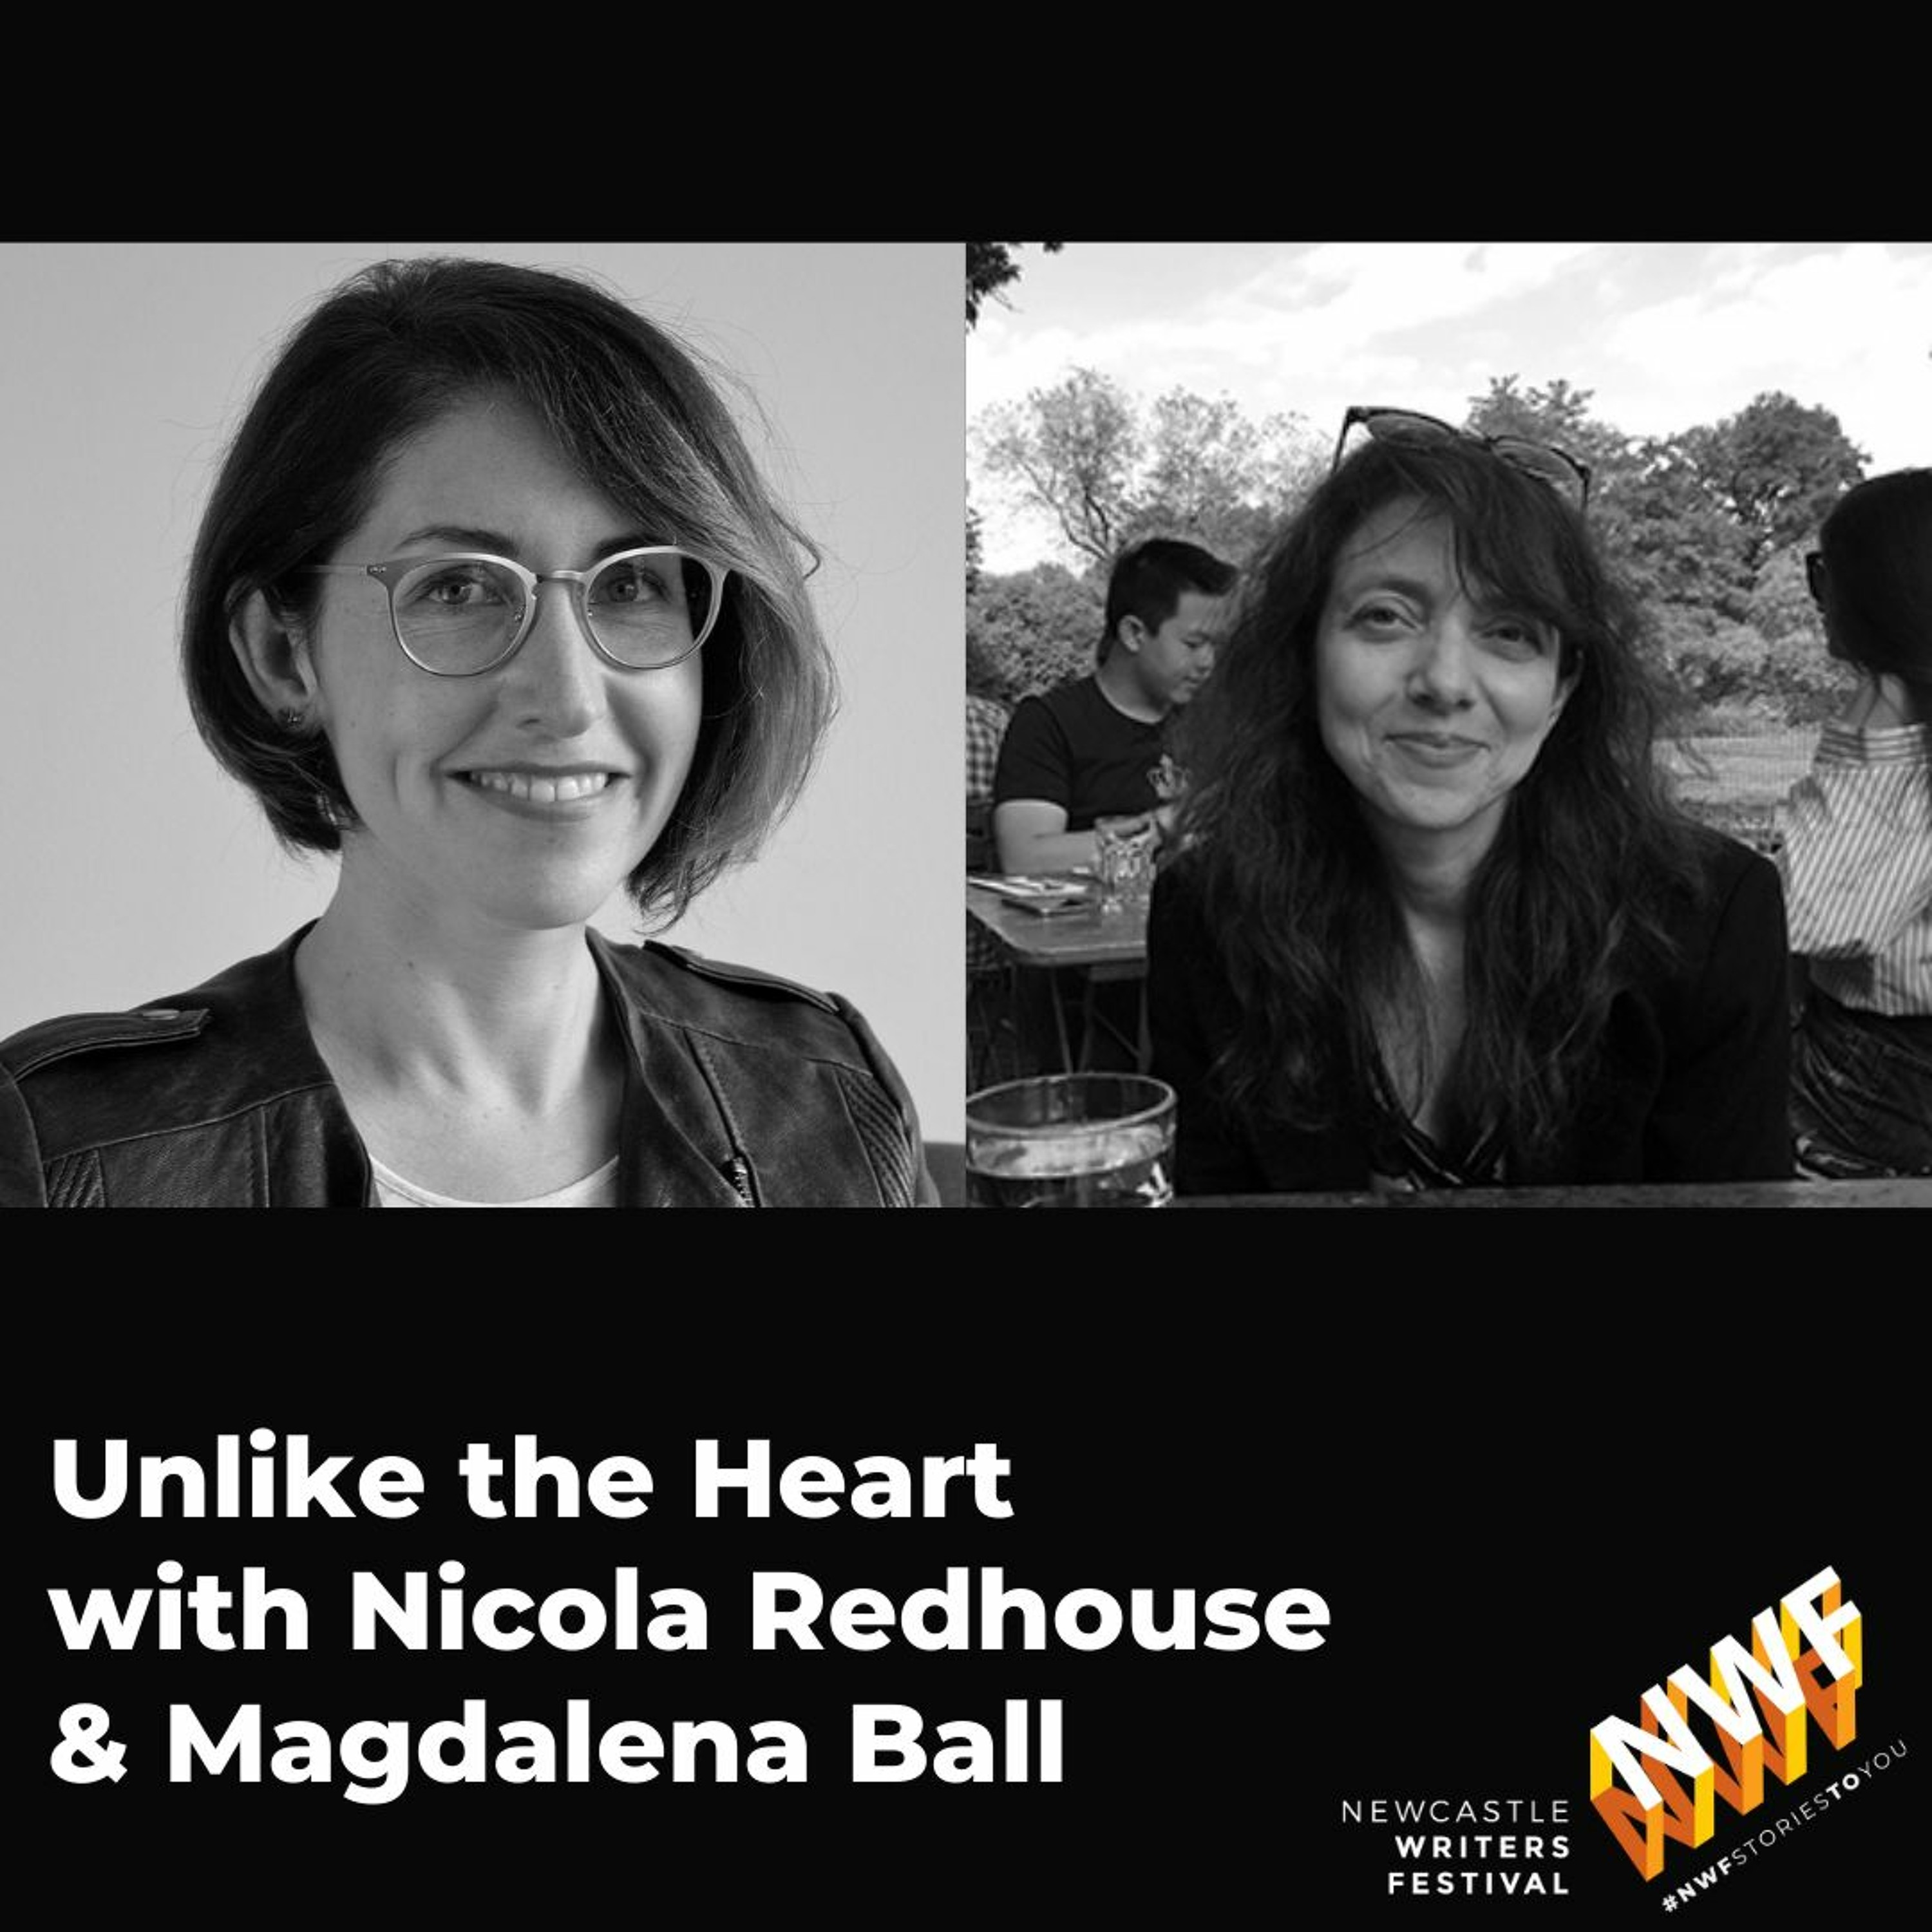 Unlike The Heart - Nicola Redhouse speaks to Magdalena Ball